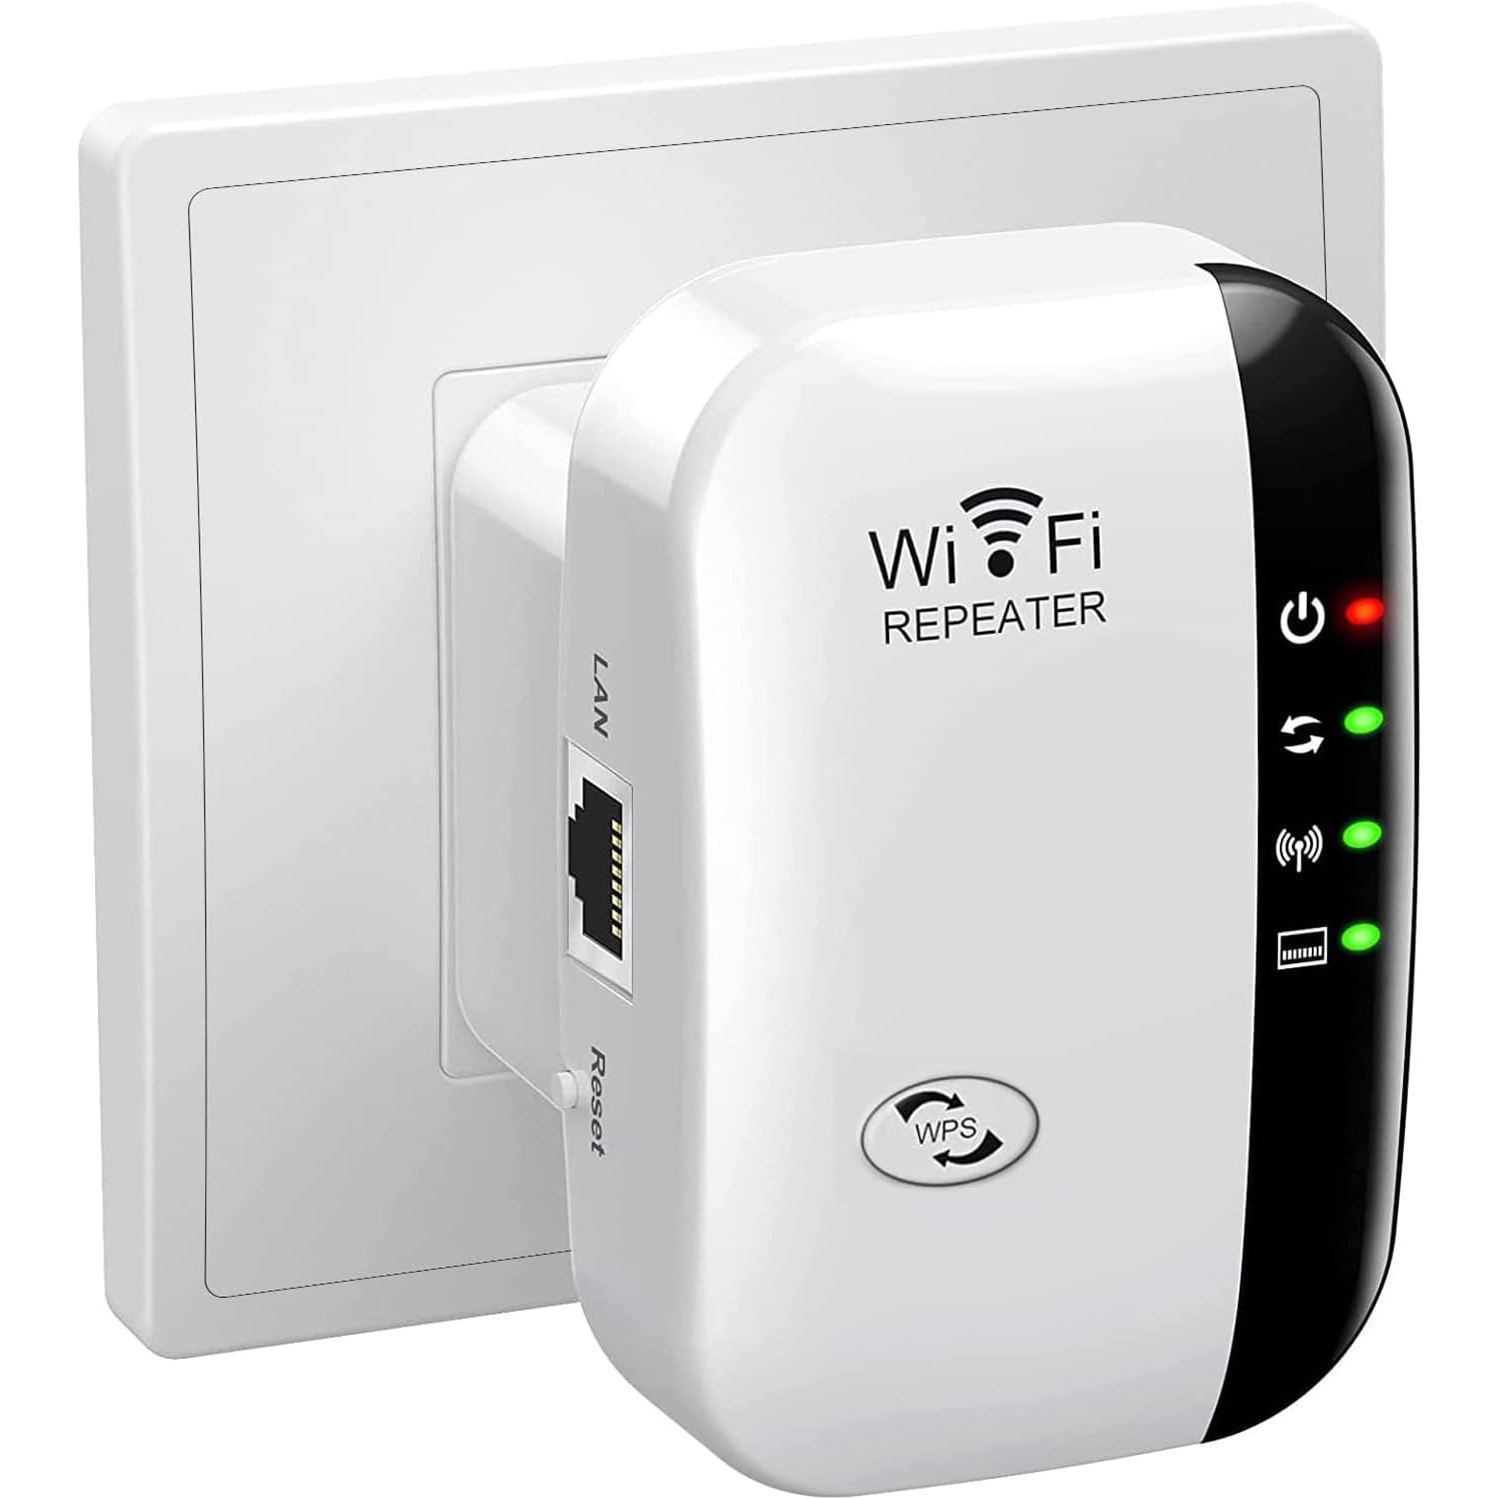 SAGA WiFi Extender Signal Booster Upto 3500sqft and 35 Devices, Wireless Internet Repeater, Wi-Fi Range Extender, Long Range Amplifier with Ethernet Port, Access Point, 1-Key Setup